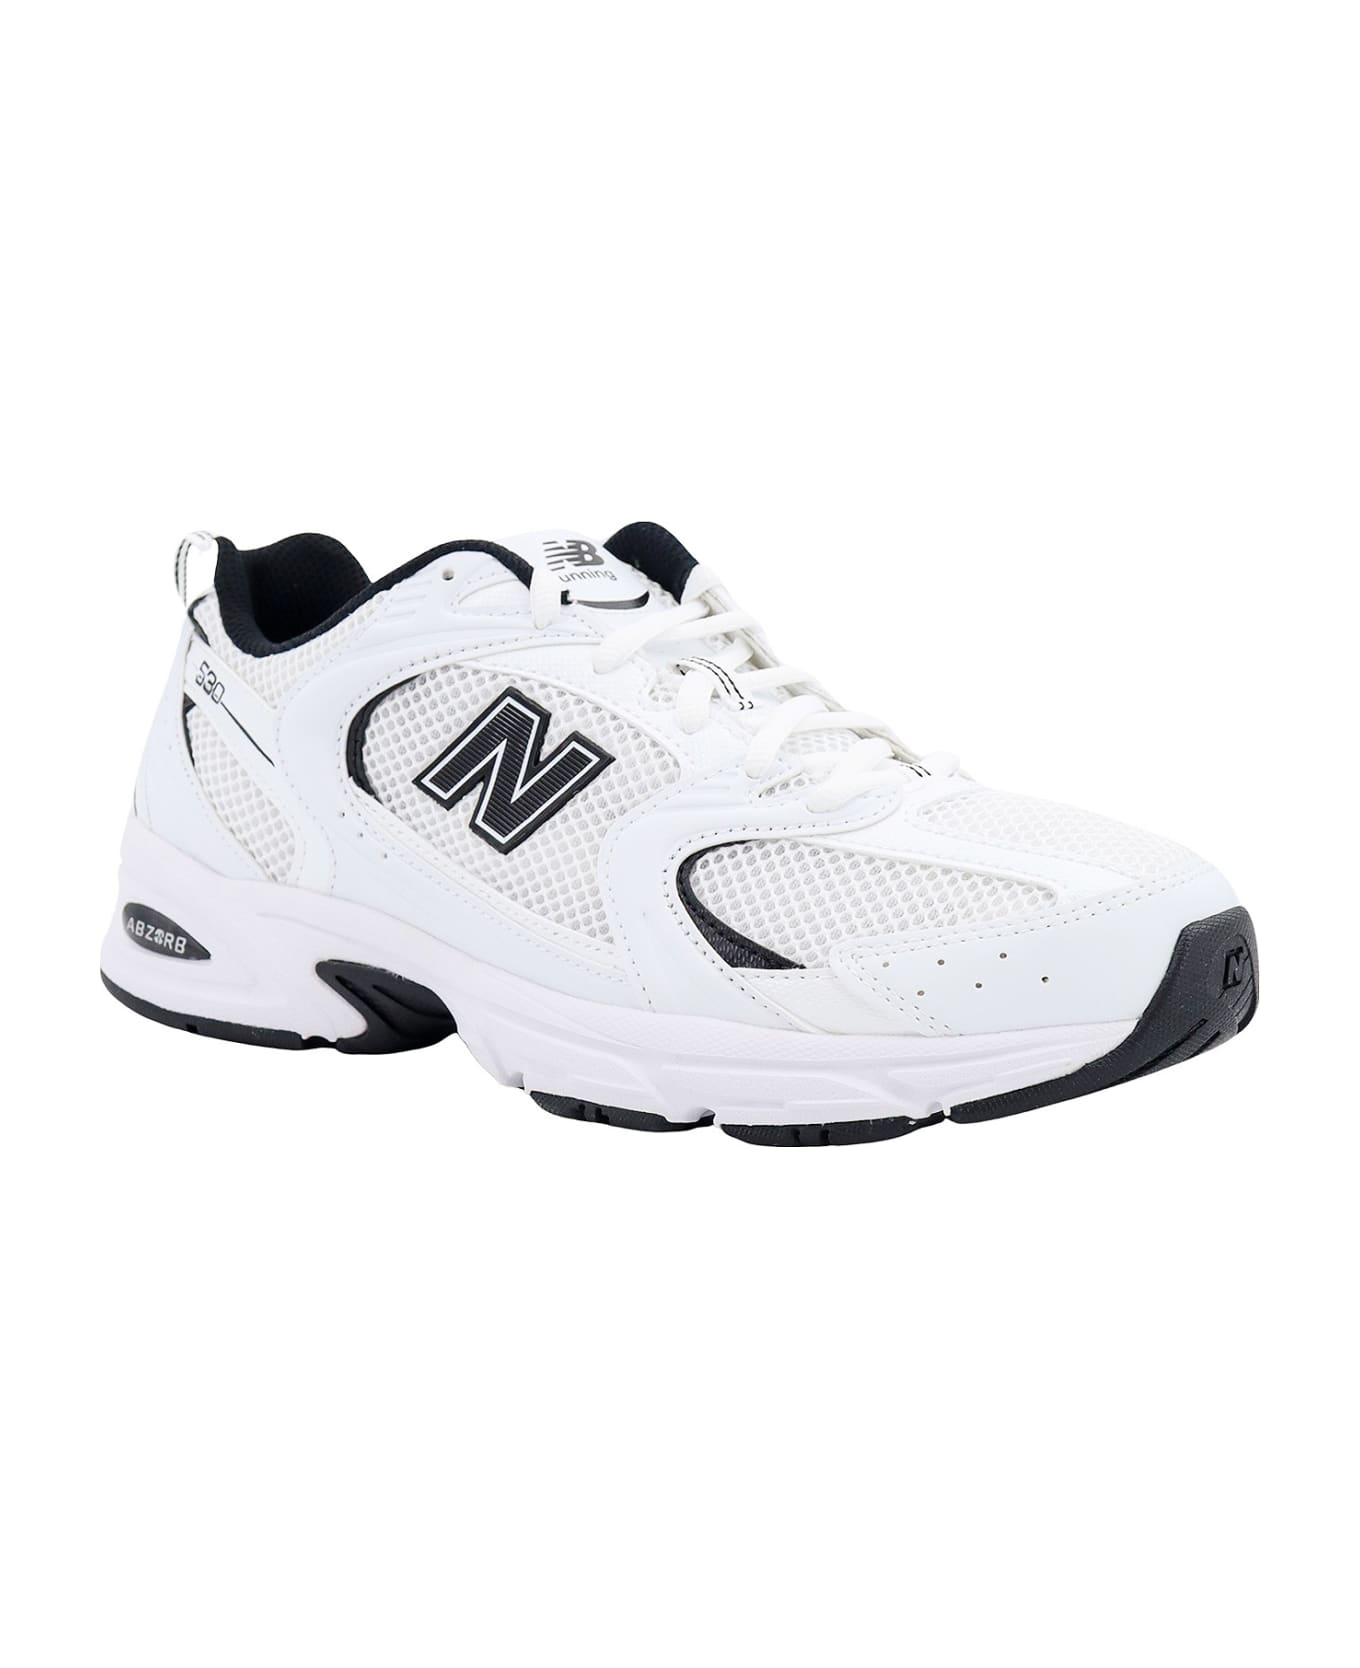 New Balance 530 Sneakers - White